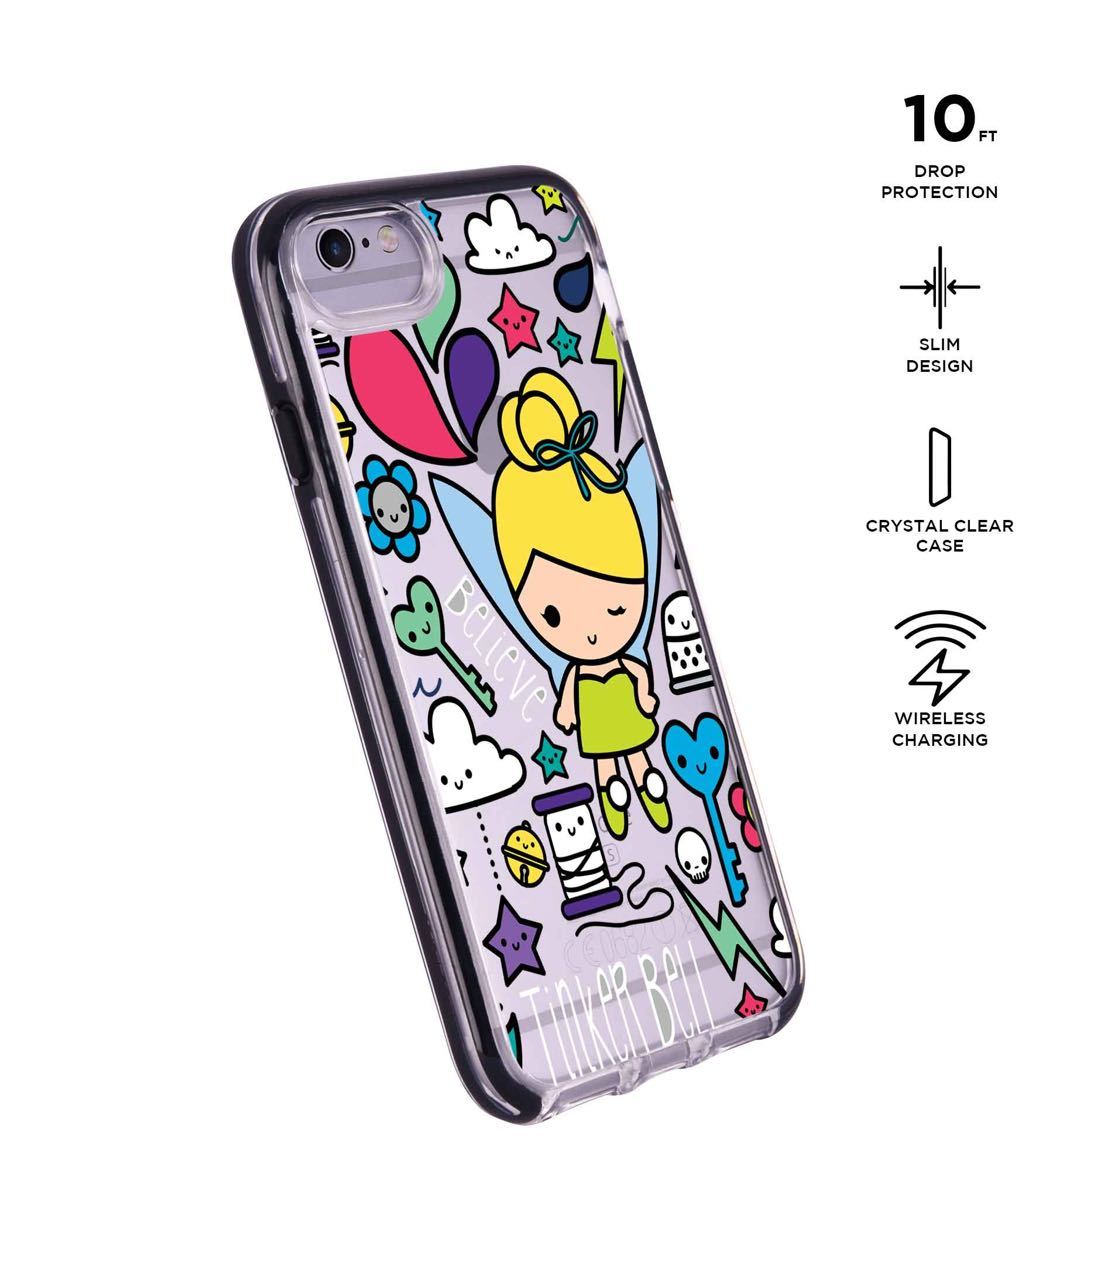 Tinker World - Extreme Phone Case for iPhone 6S Plus